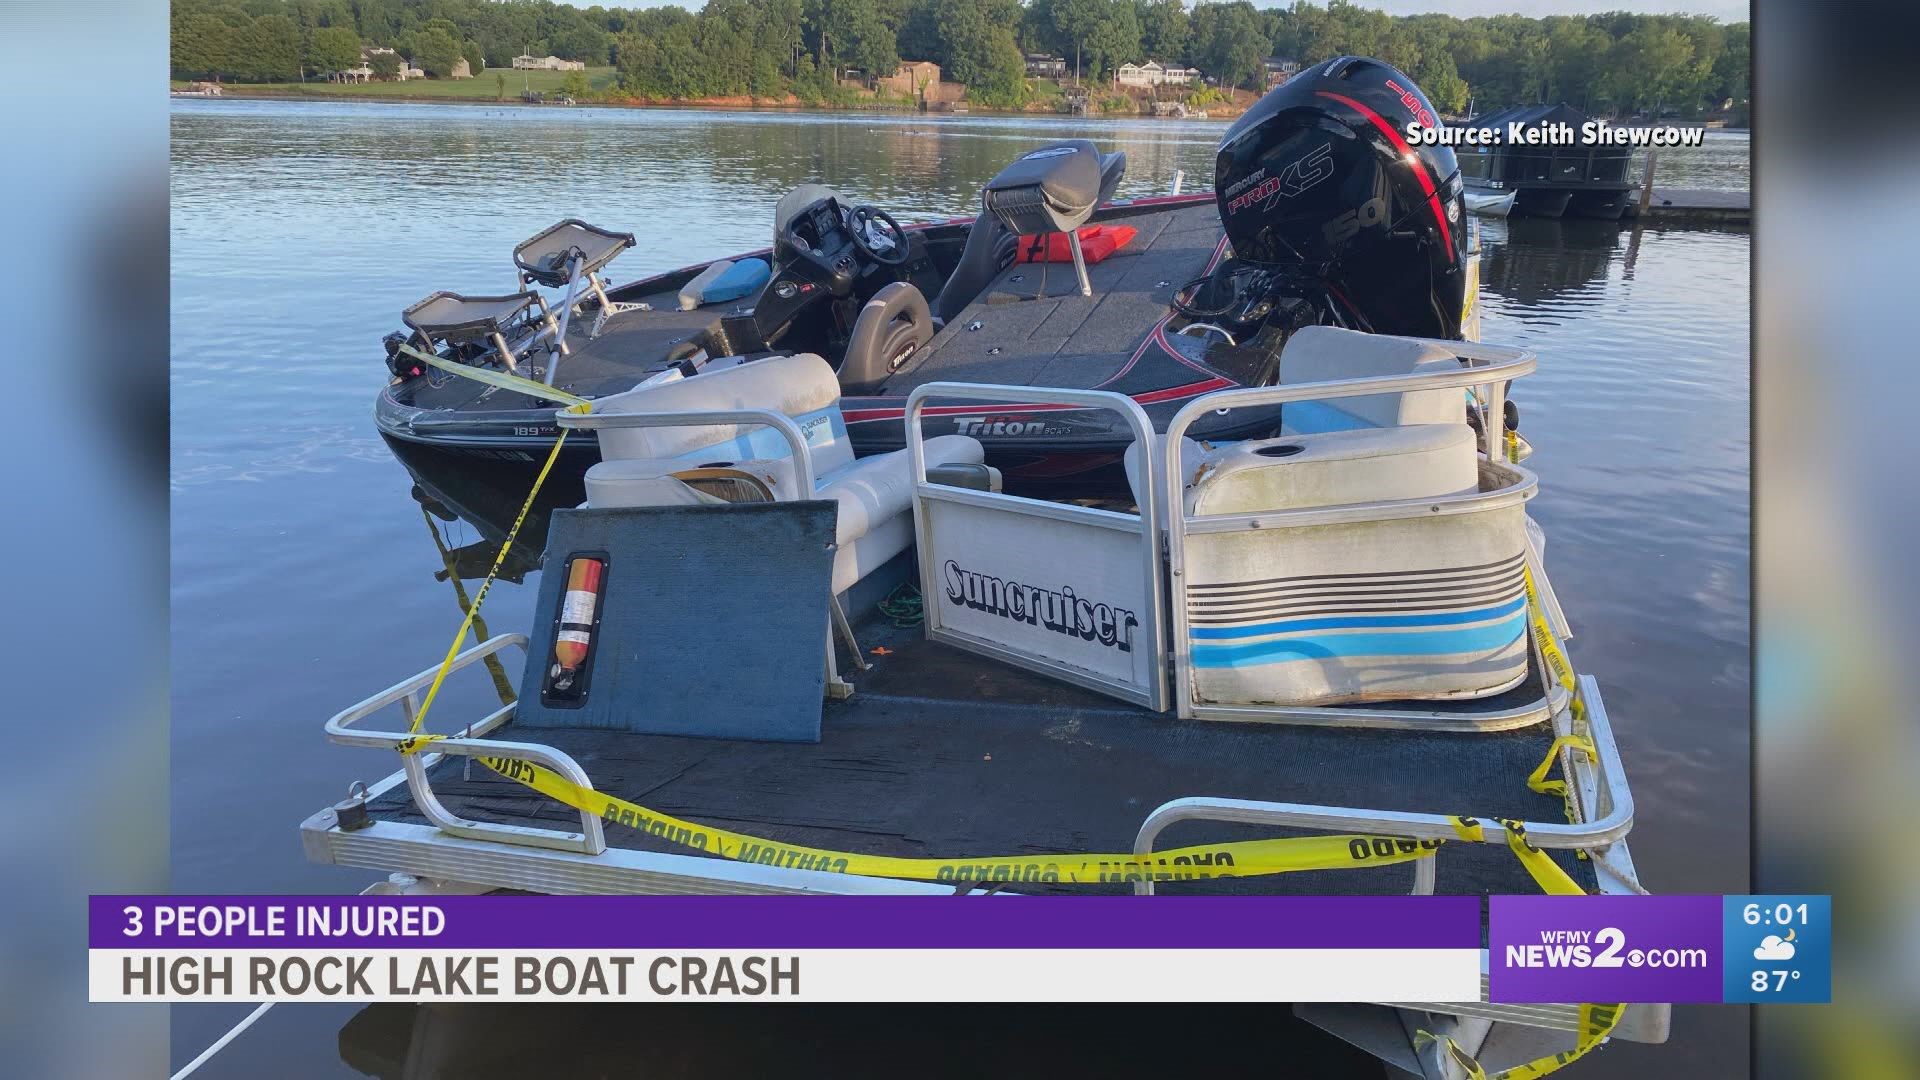 Two of the people injured in the High Rock Lake boat crash are out of the hospital, but one is facing a long road to recovery.